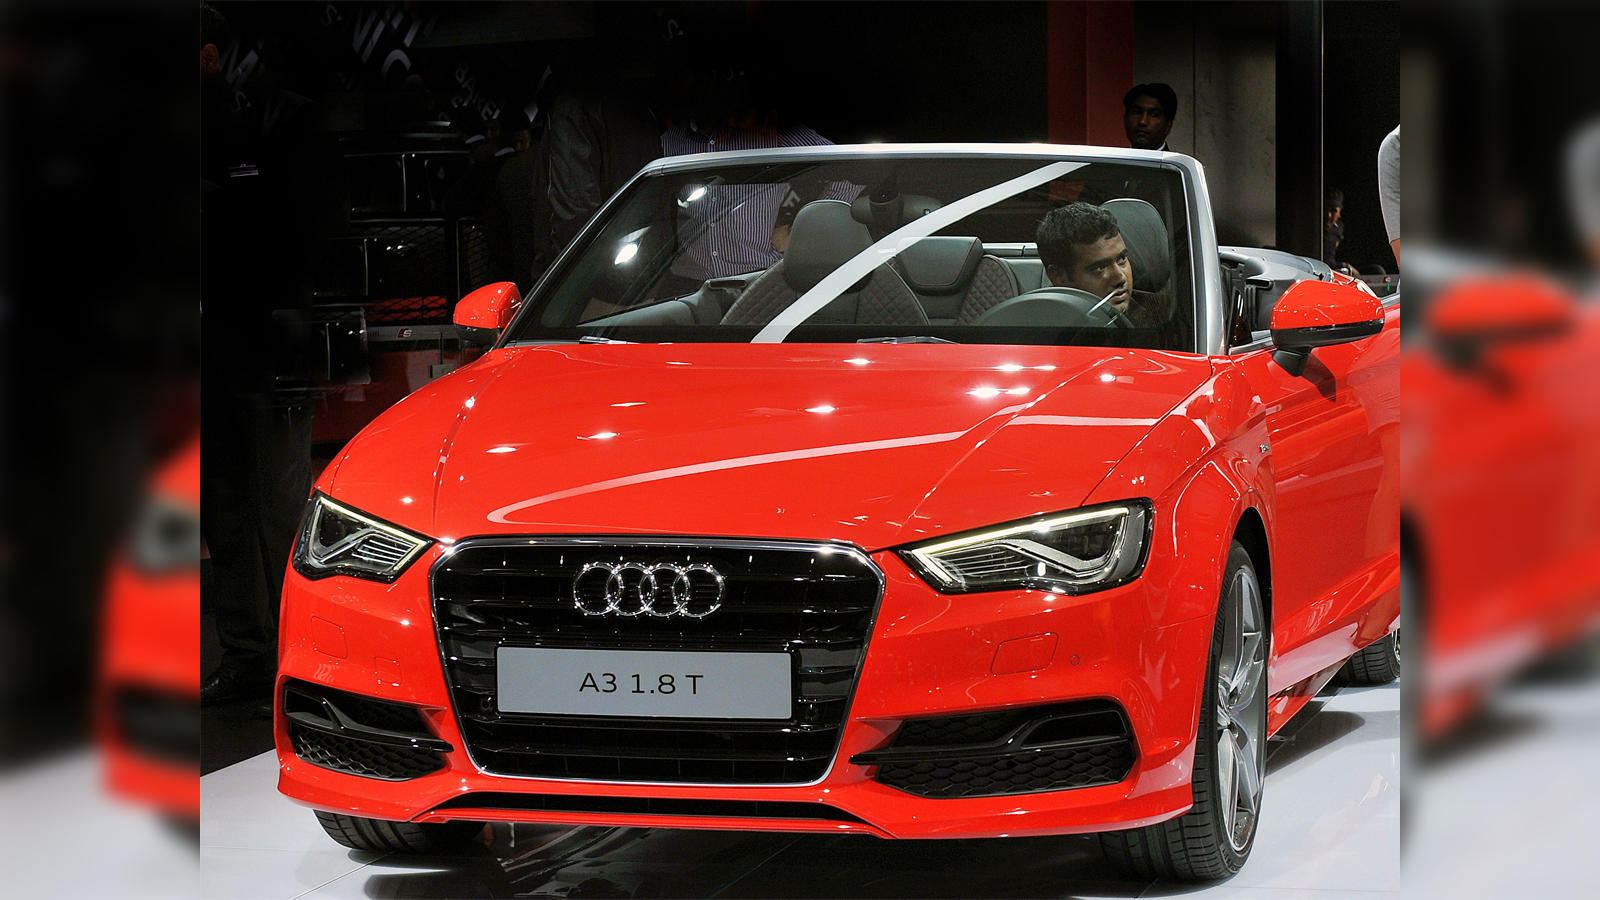 Budget 2020: Higher taxes, other levies hurting luxury car sales; govt must address in Budget: Audi India head - The Economic Times